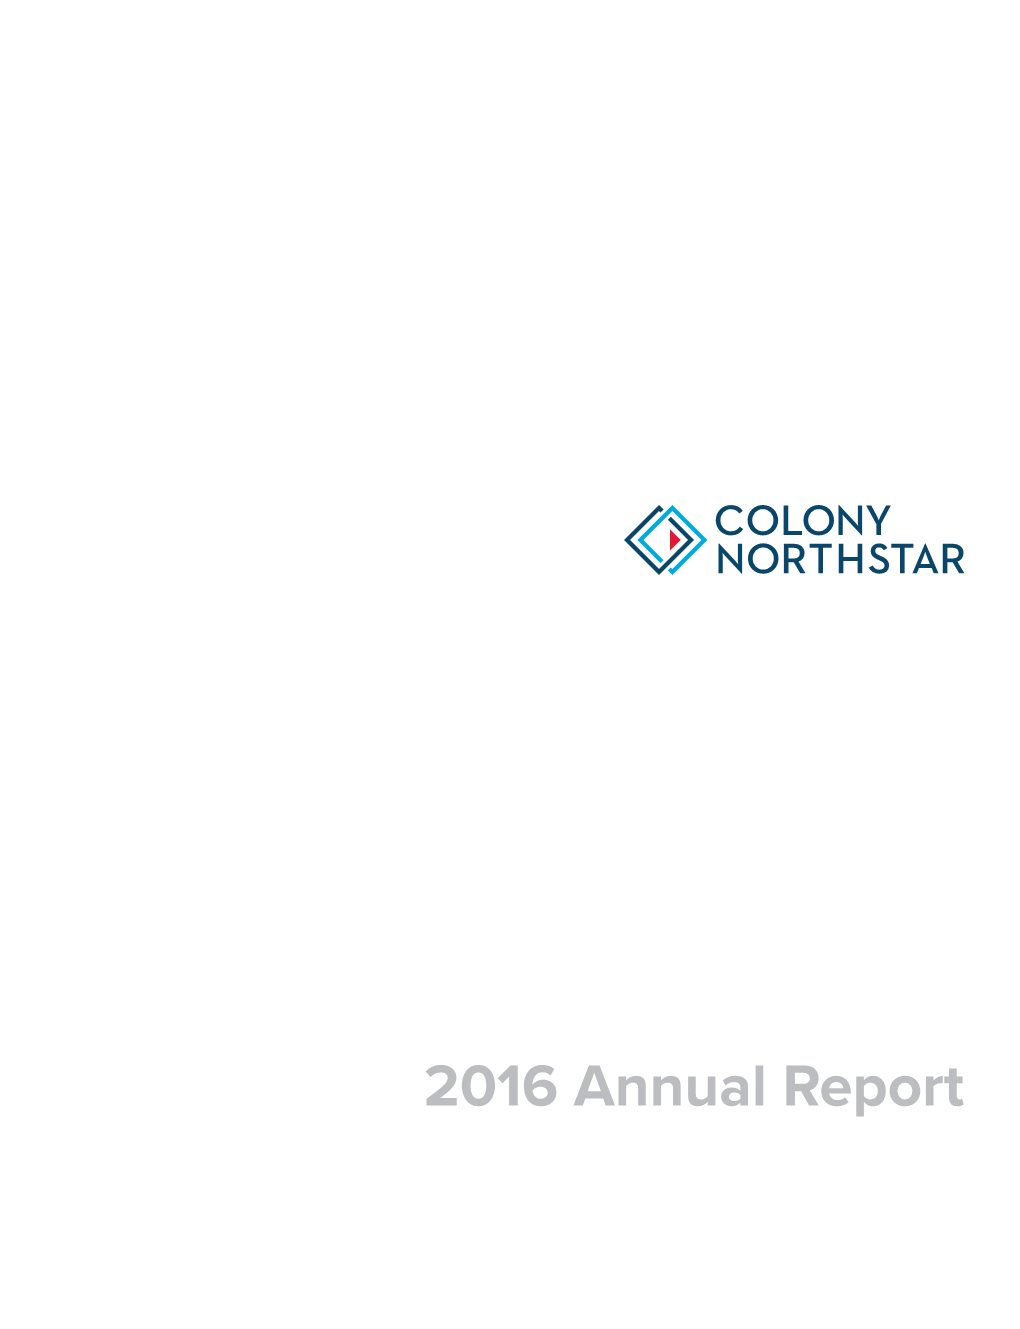 Colony Northstar, Inc. 2016 Annual Report